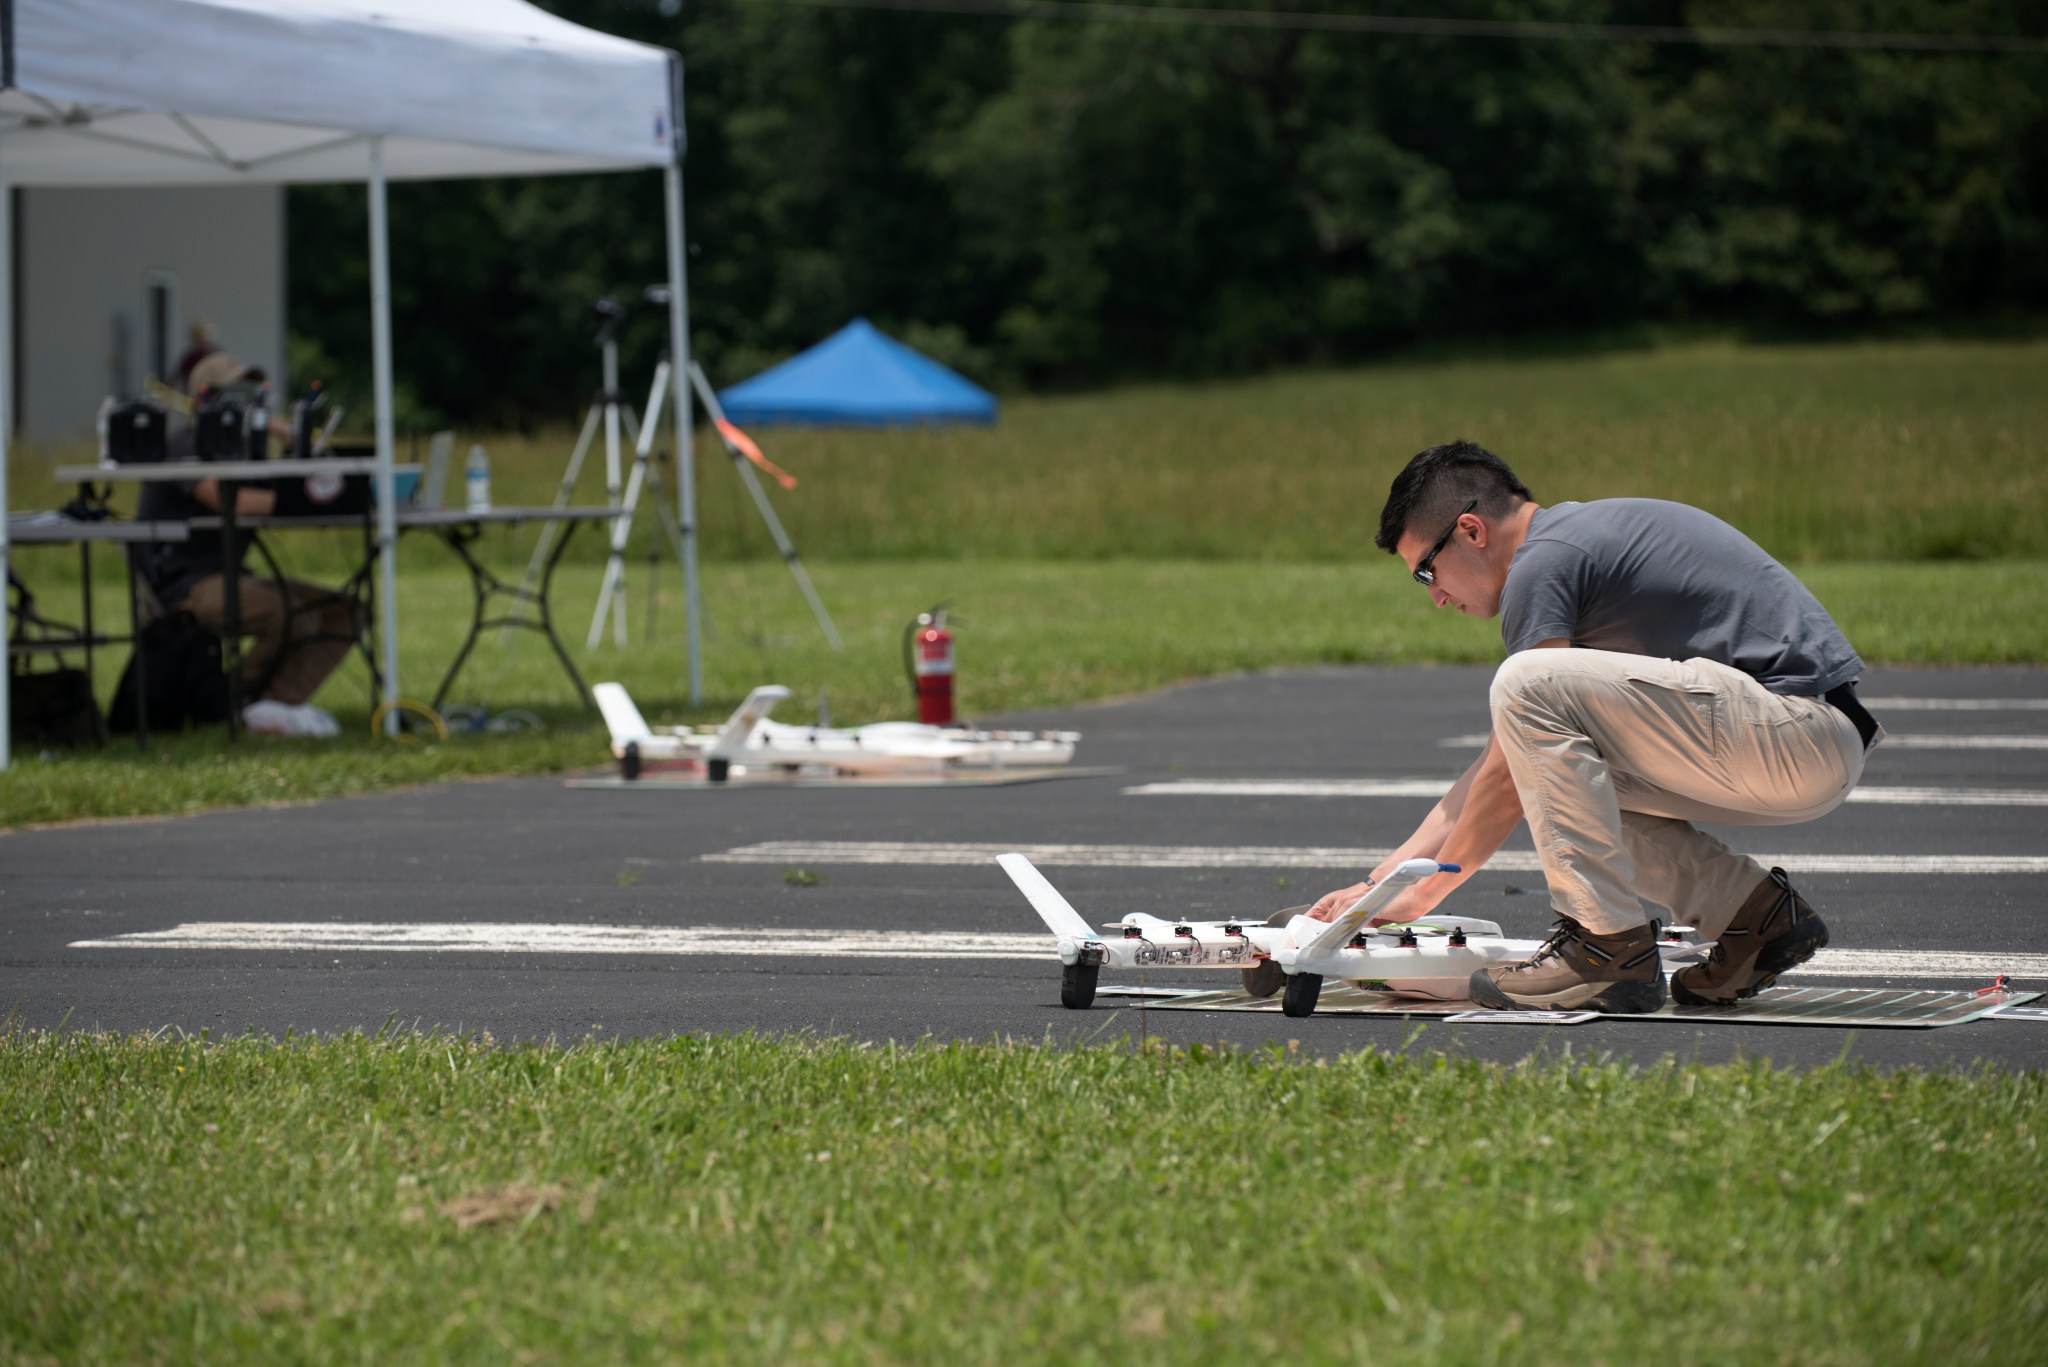 Drone test at FAA's test site in Virginia.